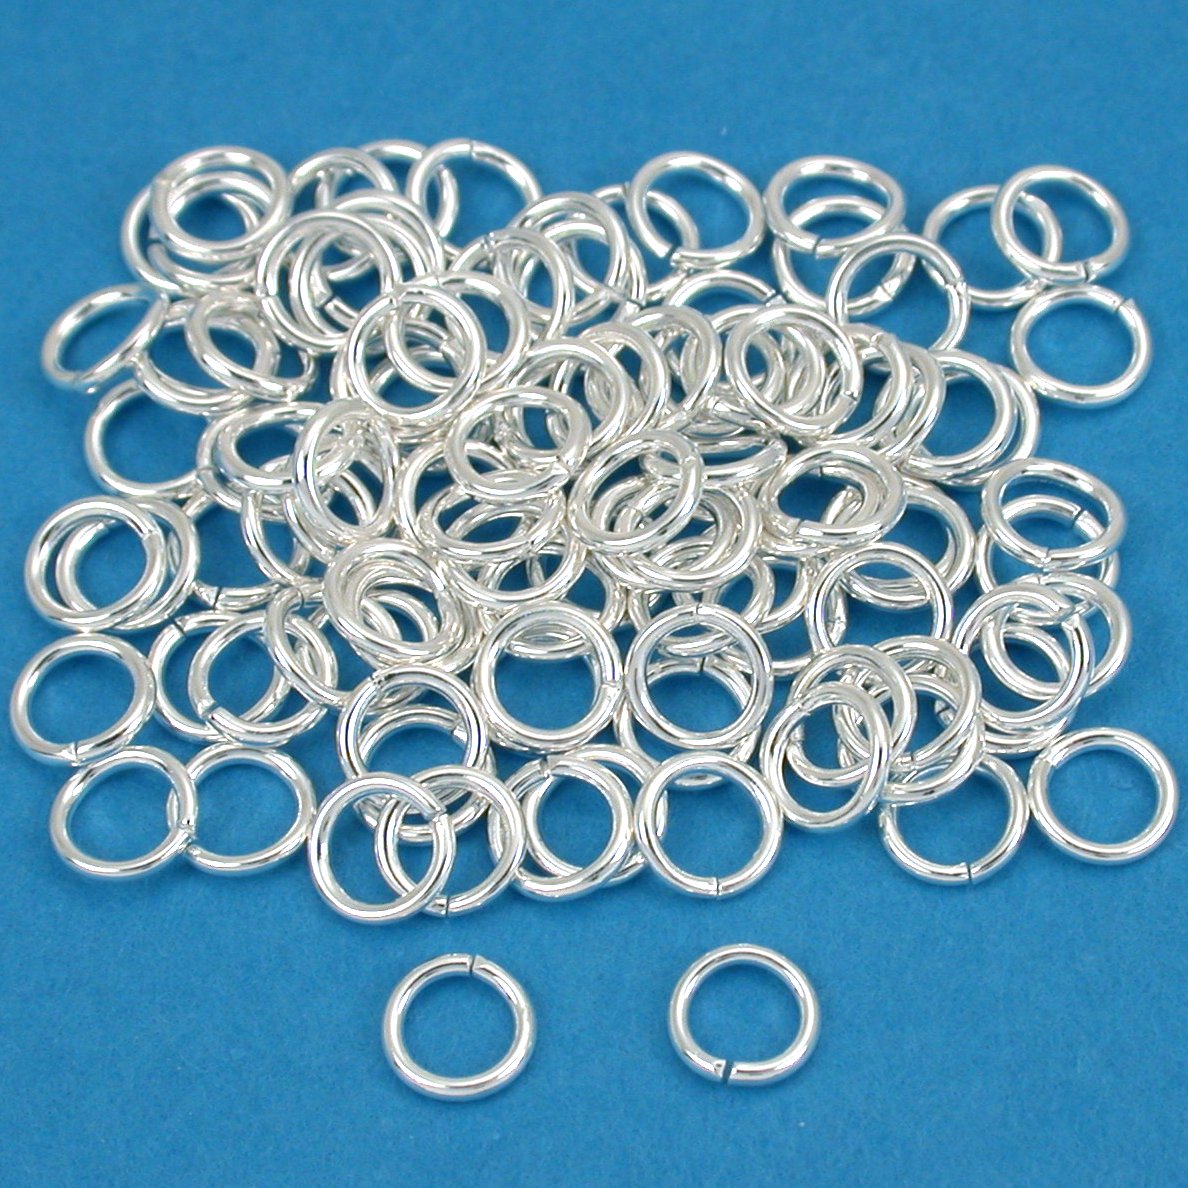 Open Jump Rings Silver Plated 19 Gauge 6mm 100Pcs